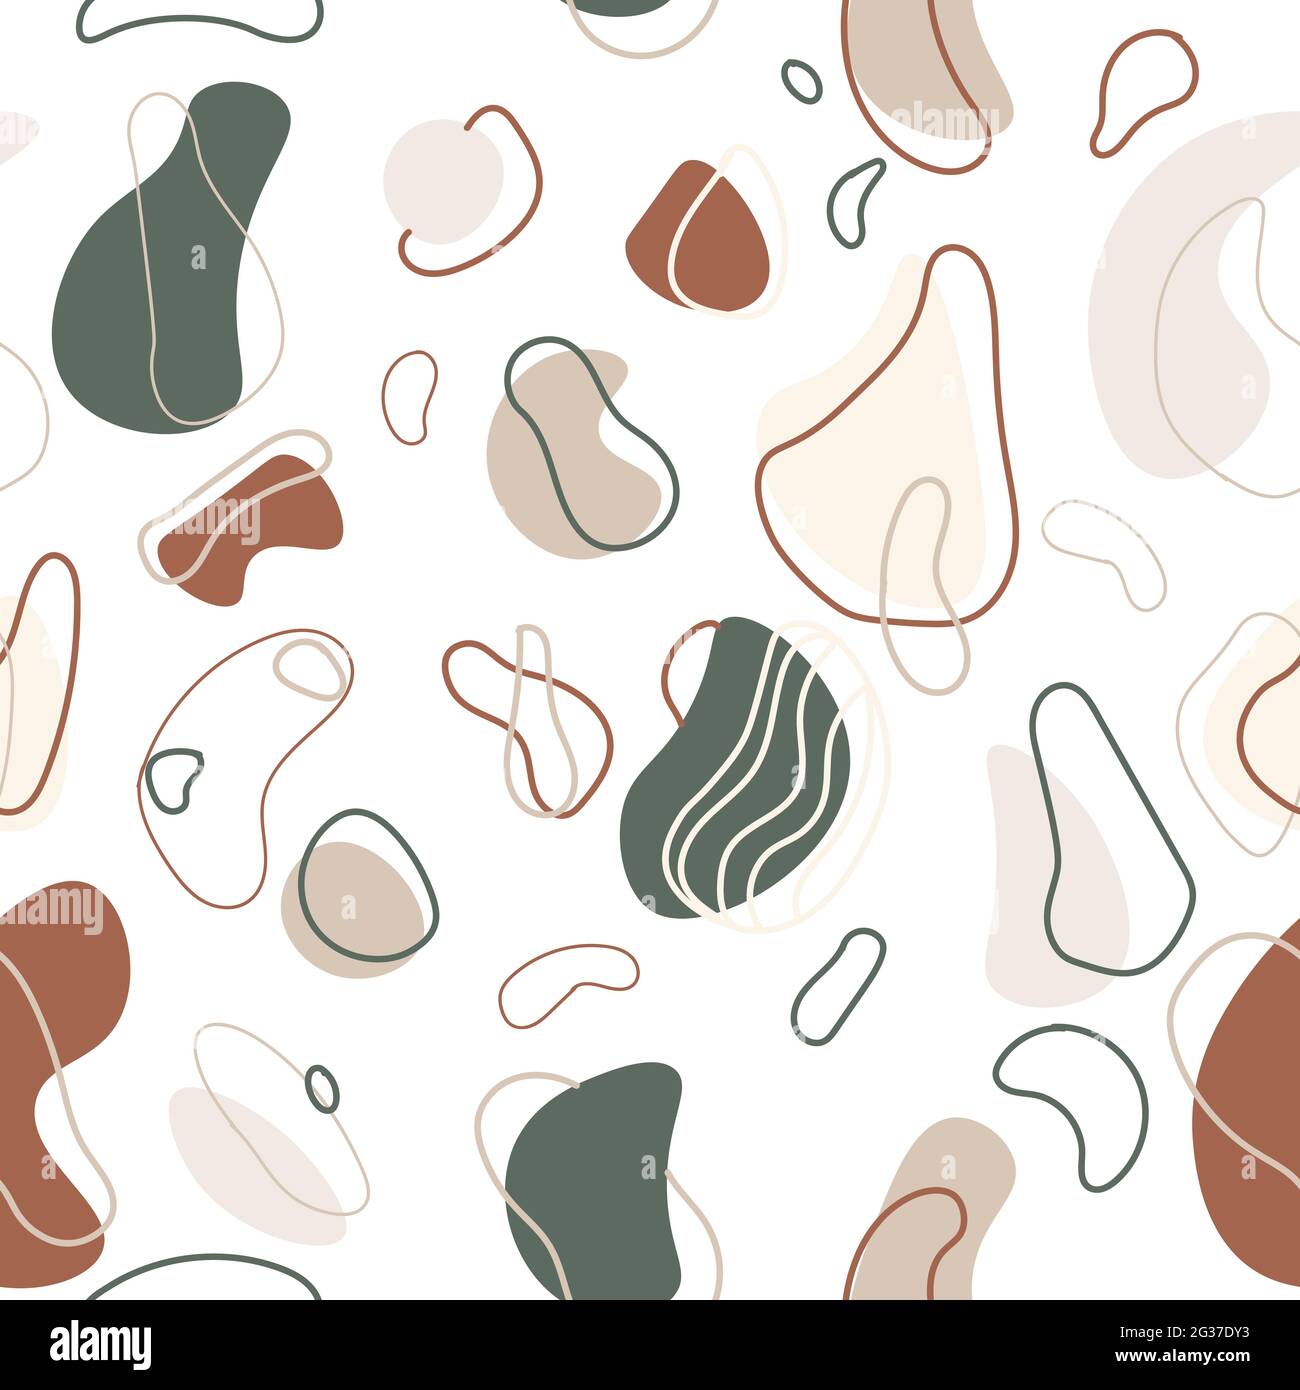 Amoeba seamless pattern conceptual modern art with creative elements and earth tones. Repeat background with liquid and wavy minimalistic stains. Orga Stock Vector